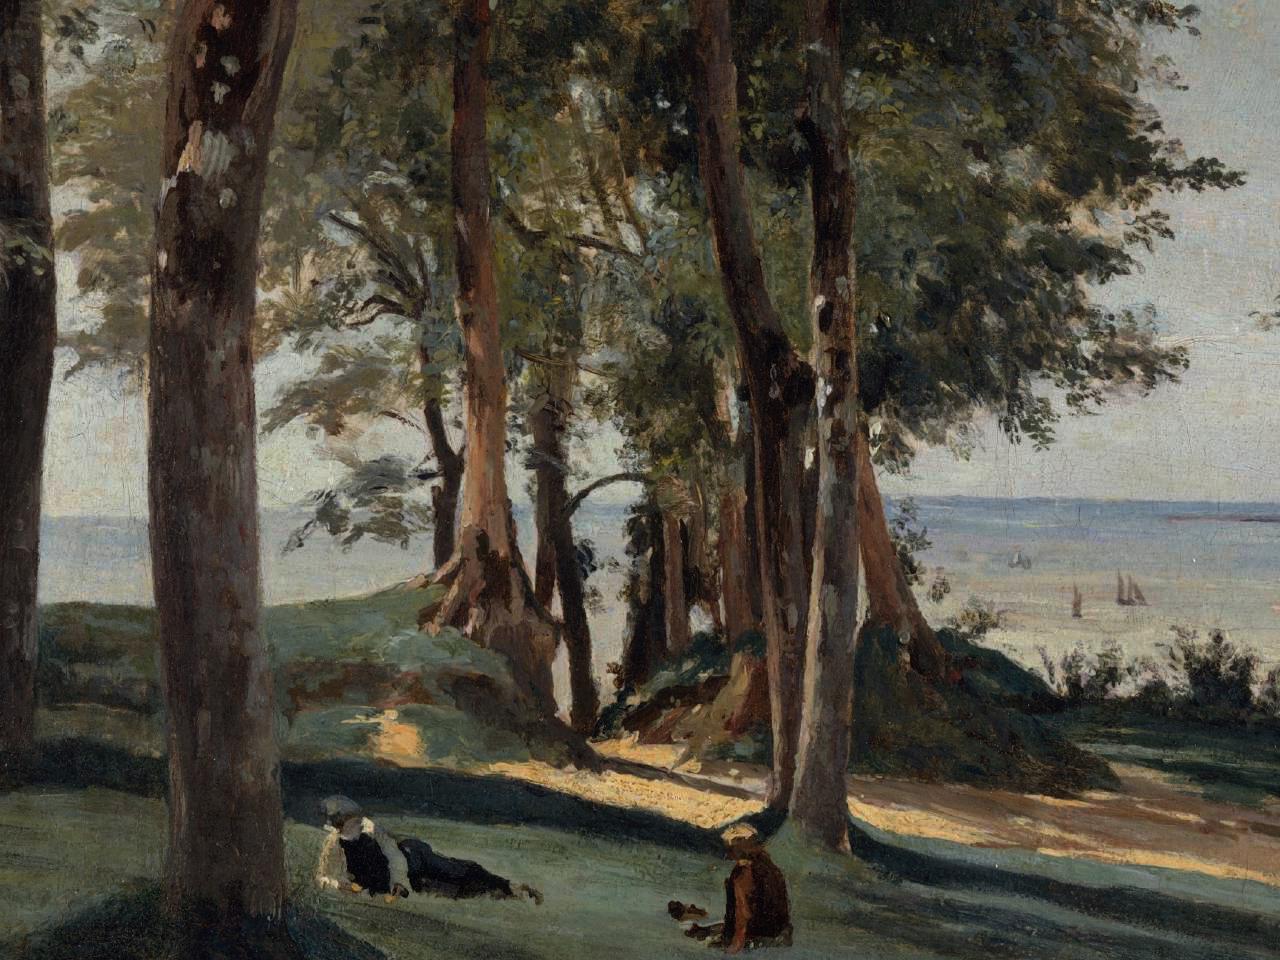 The site of the Calvary, a shrine built in 1628 at the top of a cliff overlooking the medieval town of Honfleur, was popular in the nineteenth century among tourists, pilgrims, and people offering prayers for men at sea. Corot painted this work during a trip to Normandy, probably in 1830.